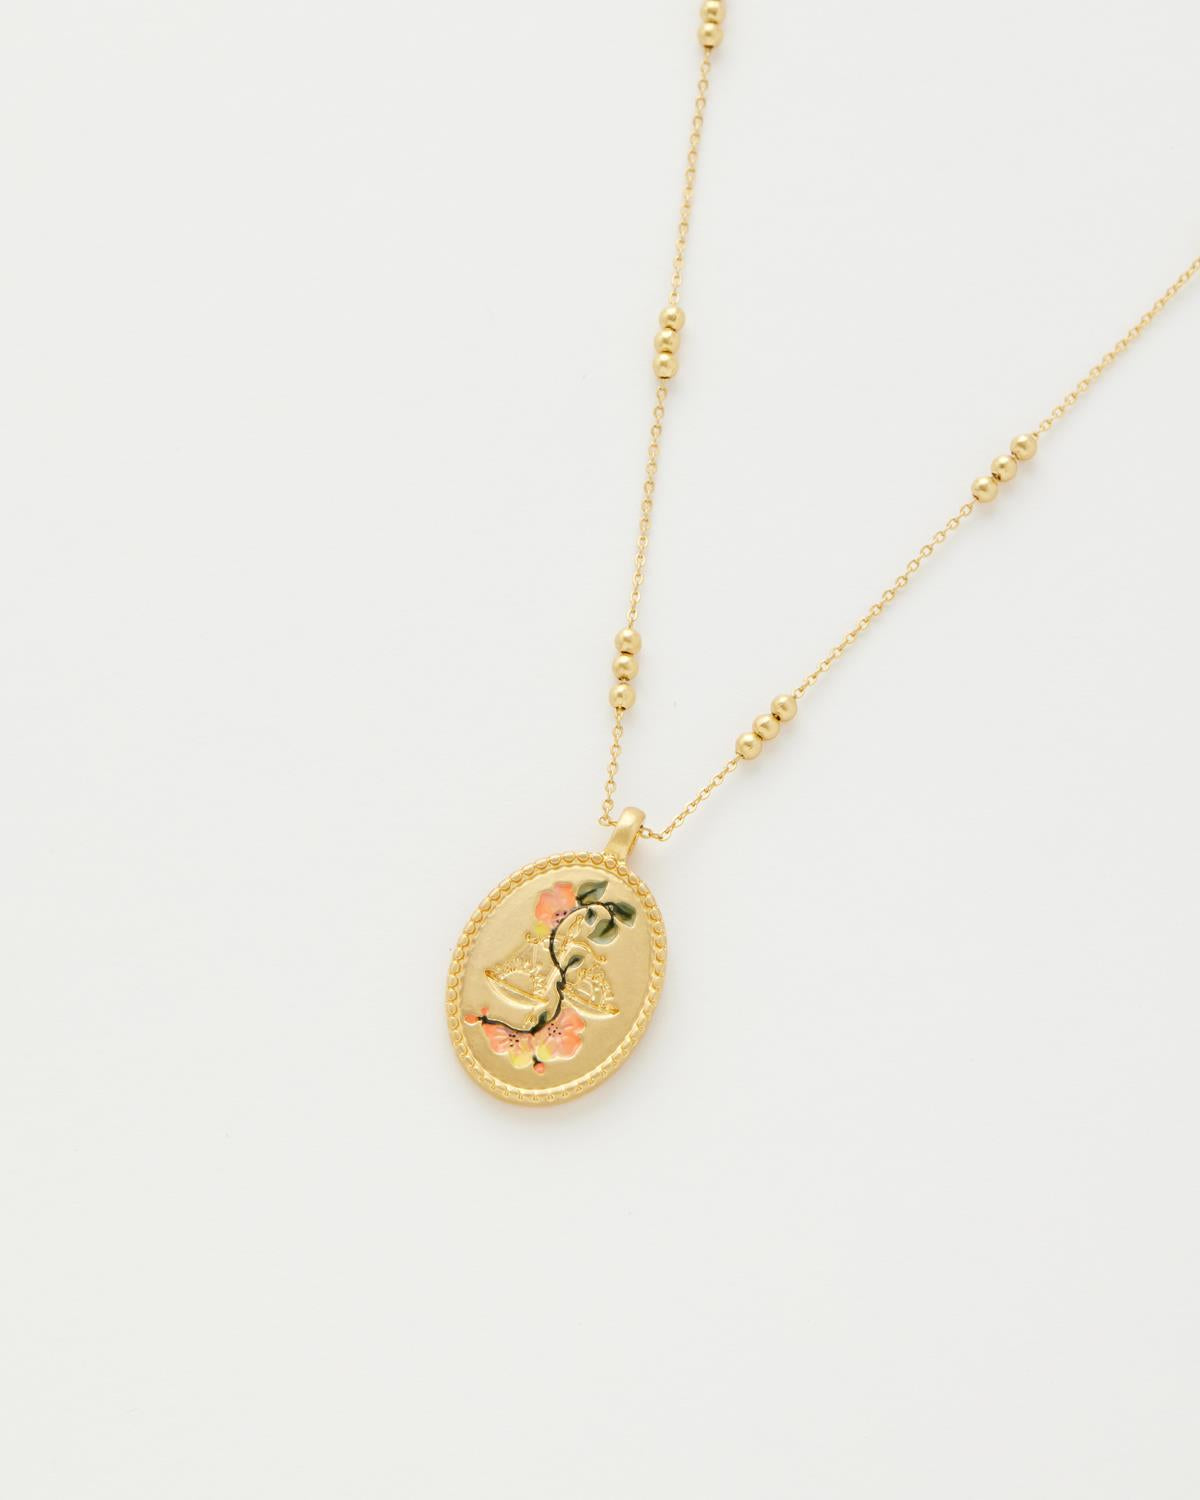 US Necklace Gold-Plated England Libra - Fable Zodiac